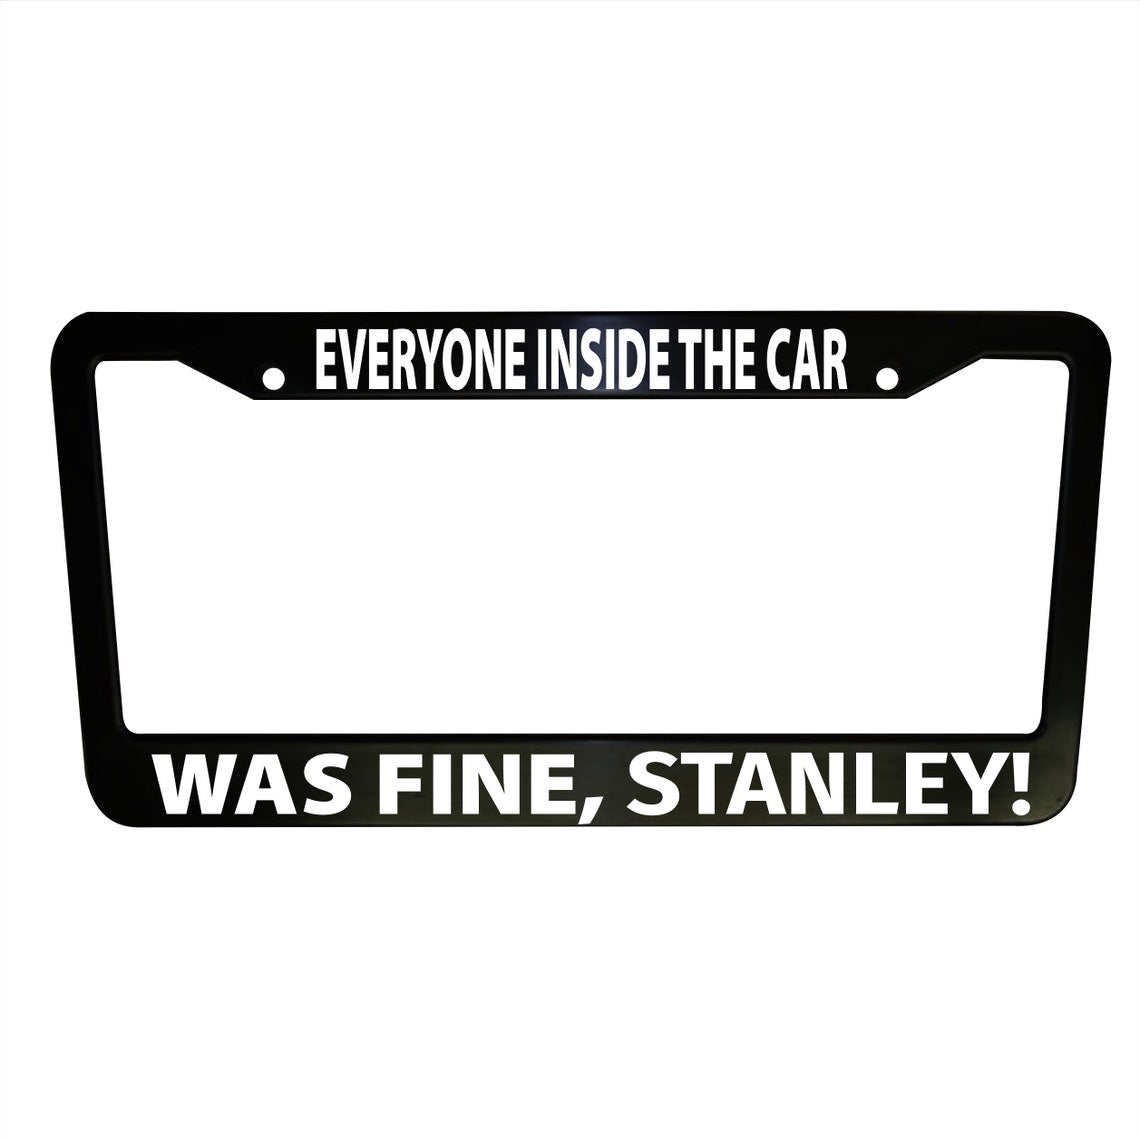 The Office Funny Black Plastic or Aluminum License Plate Frame Truck Car Van Décor Vehicle Accessories New Car Gifts Handmade Holder